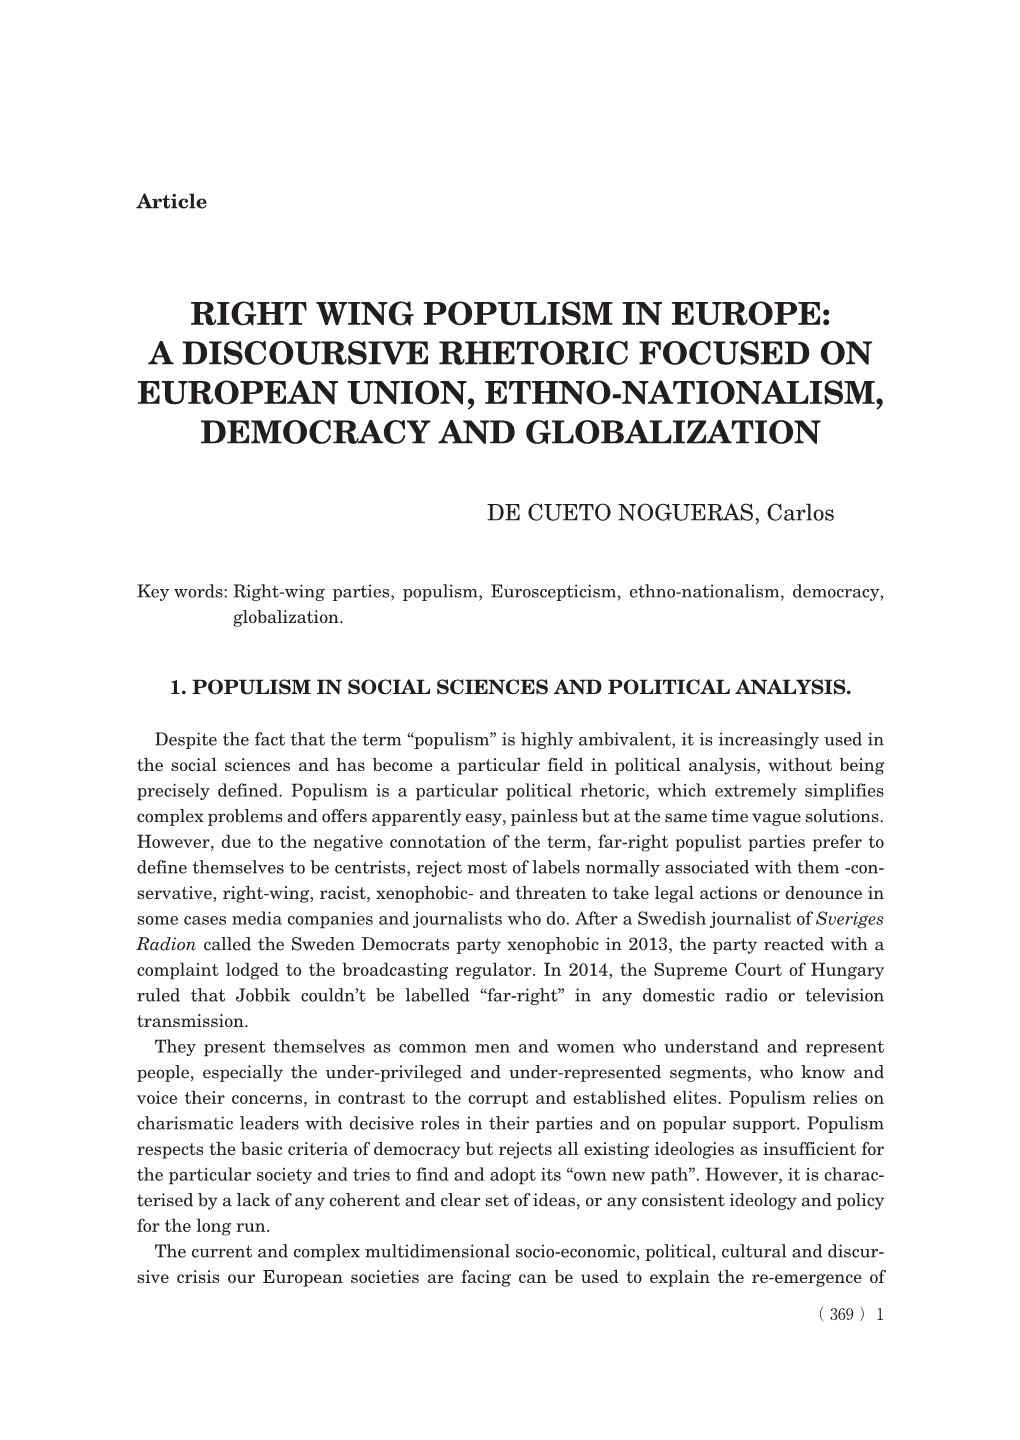 Right Wing Populism in Europe: a Discoursive Rhetoric Focused on European Union, Ethno-Nationalism, Democracy and Globalization